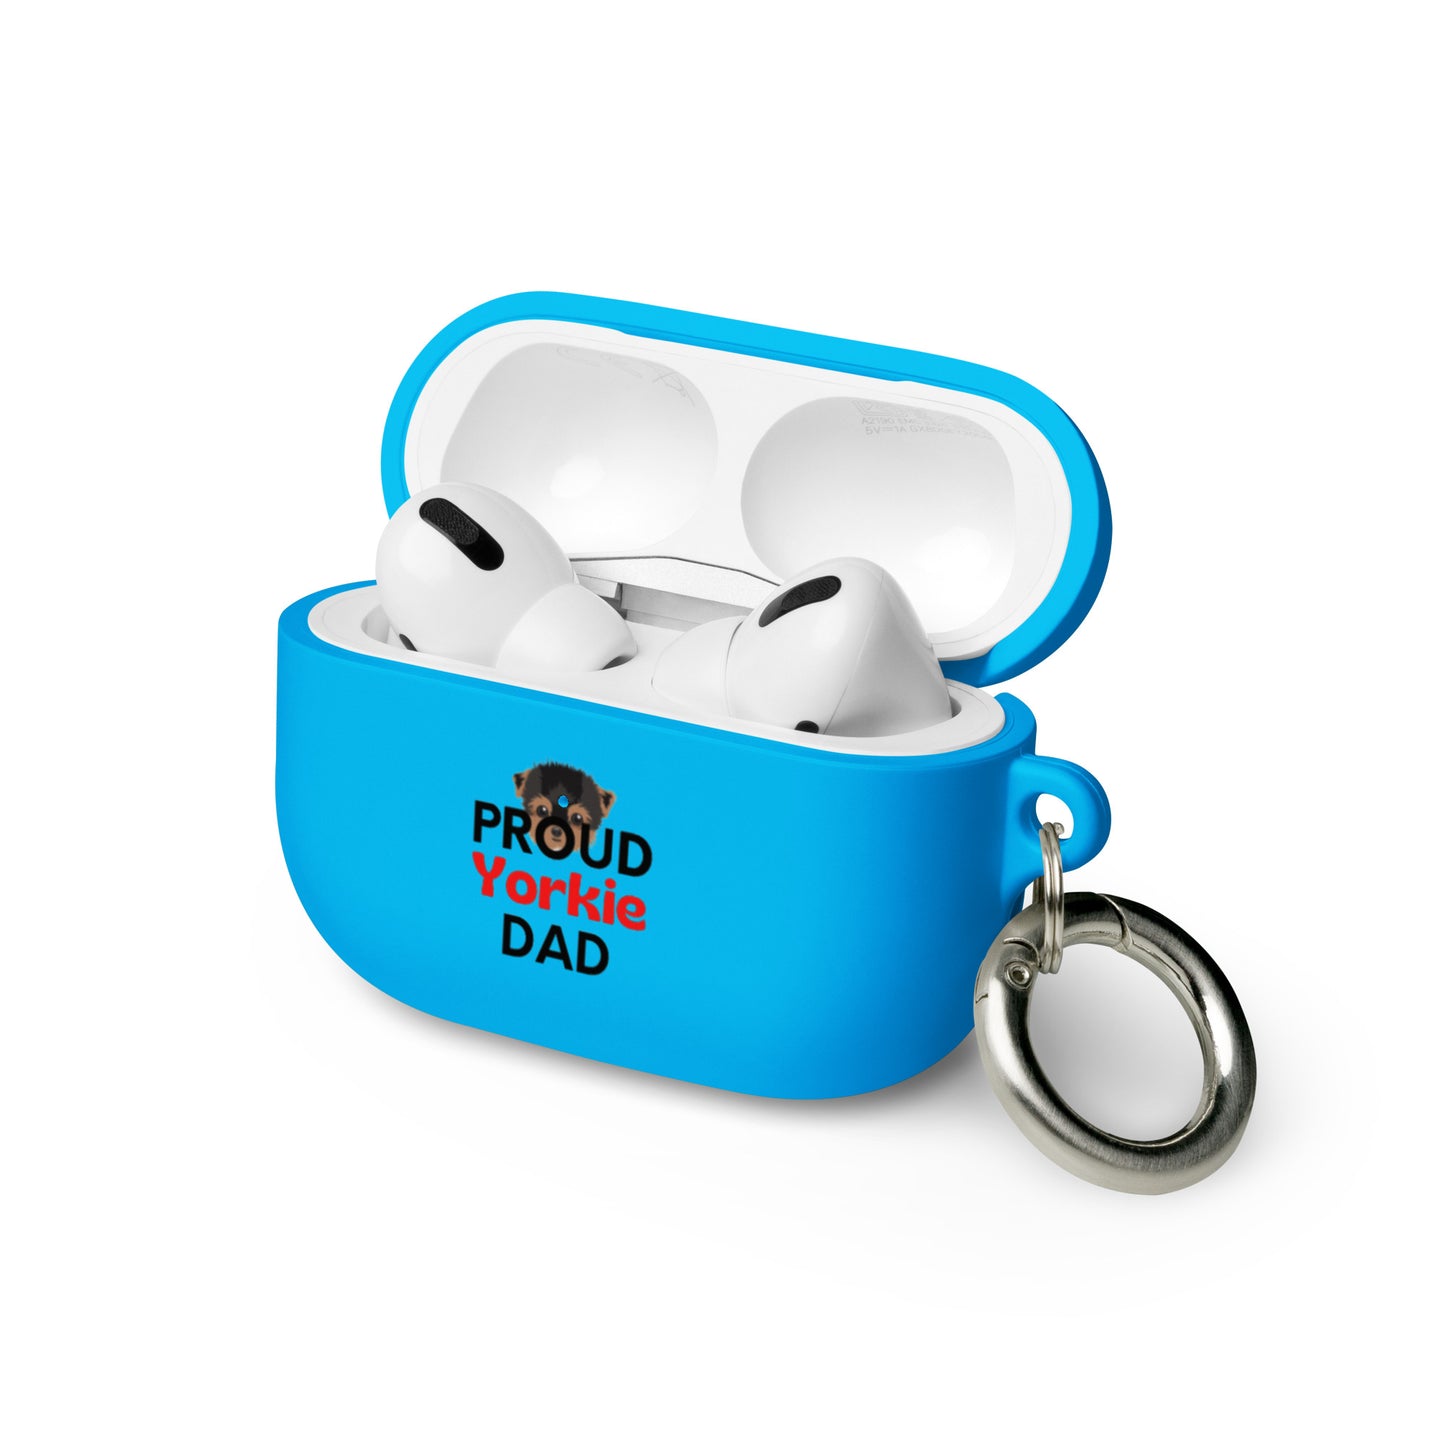 AirPods case 'PROUD Yorkie DAD'